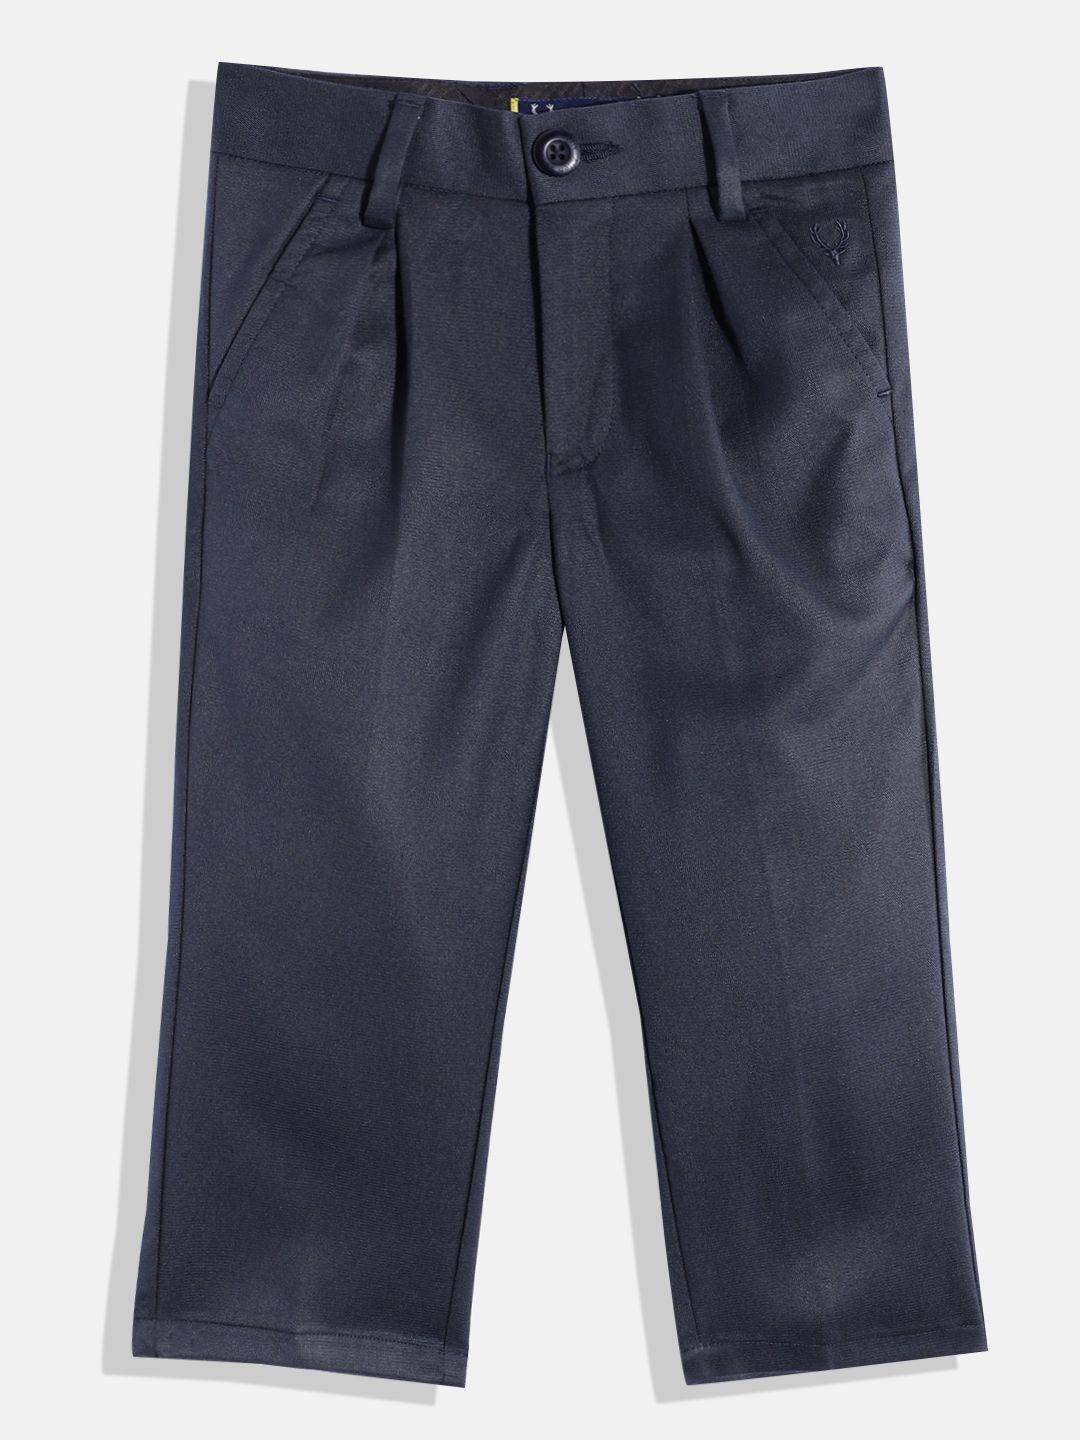 allen solly junior boys slim fit pleated chinos trousers